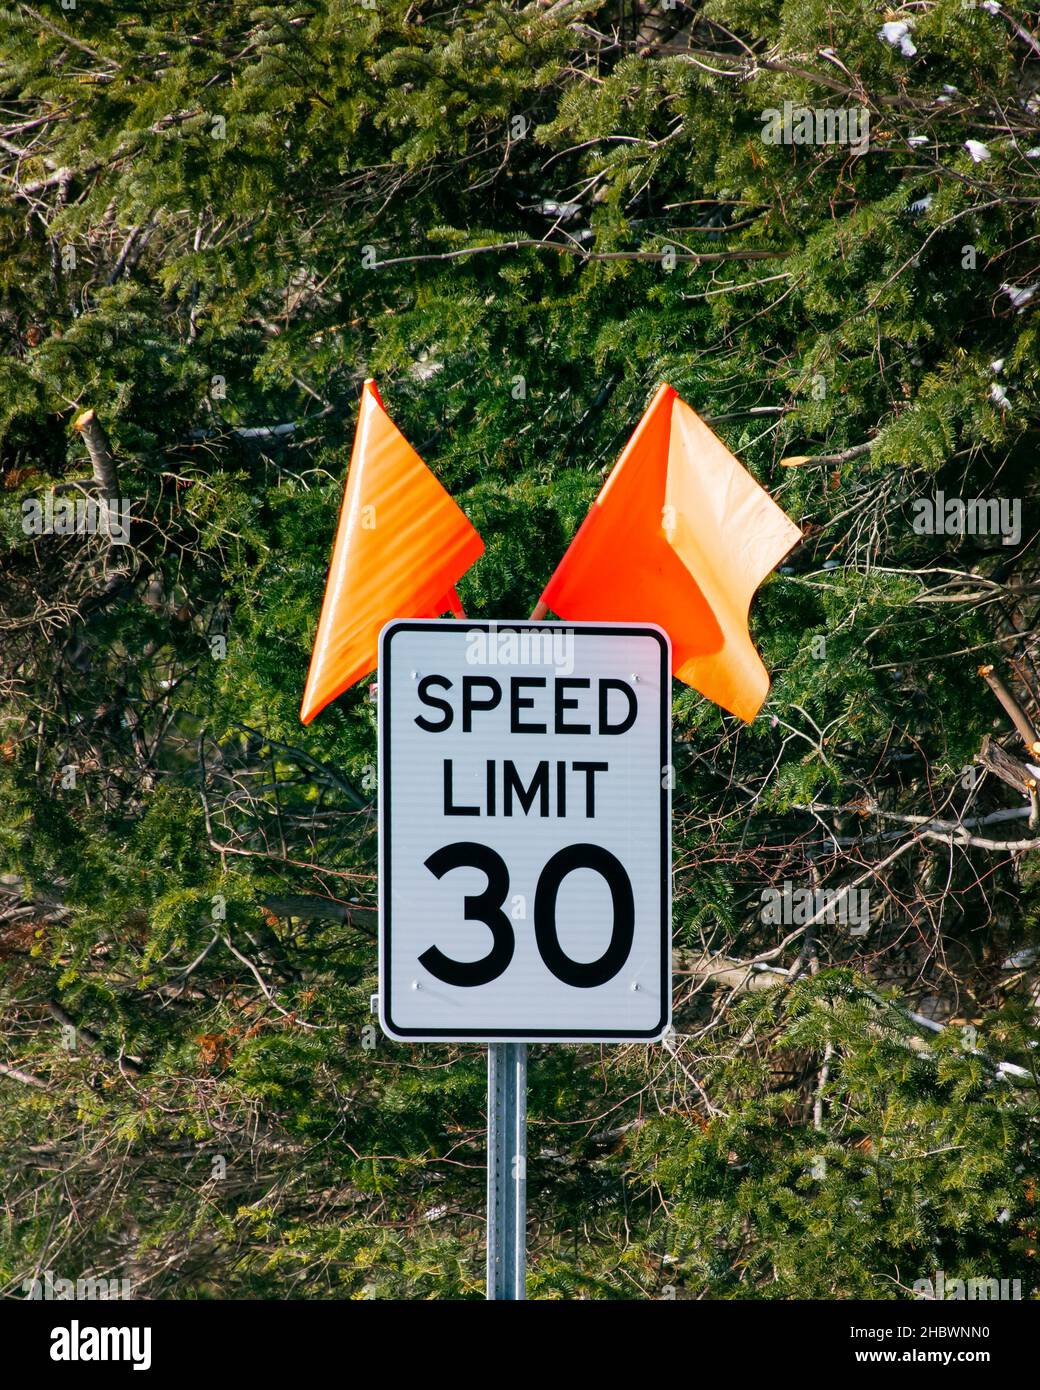 A sign indicating speed limit 30 miles per hour with orange flags to attract attention and evergreen trees in the background in Speculator, NY Stock Photo